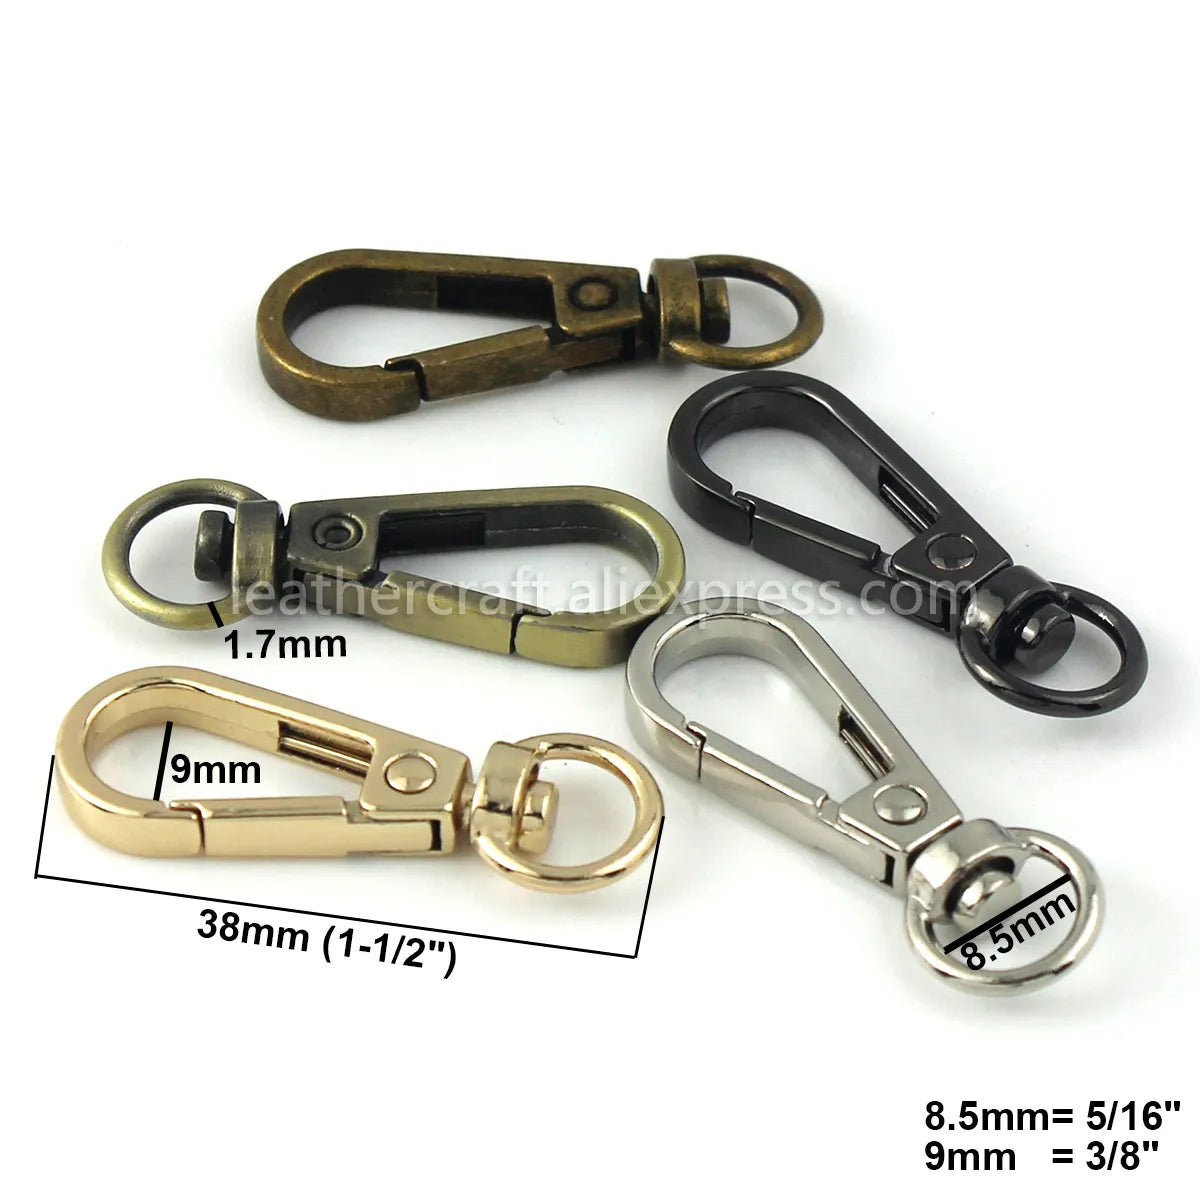 1pcs Metal Swivel O-ring Eye Snap Hook Trigger Clasps Clips for Leather Craft Bag Strap Belt Webbing Keychain Small Size